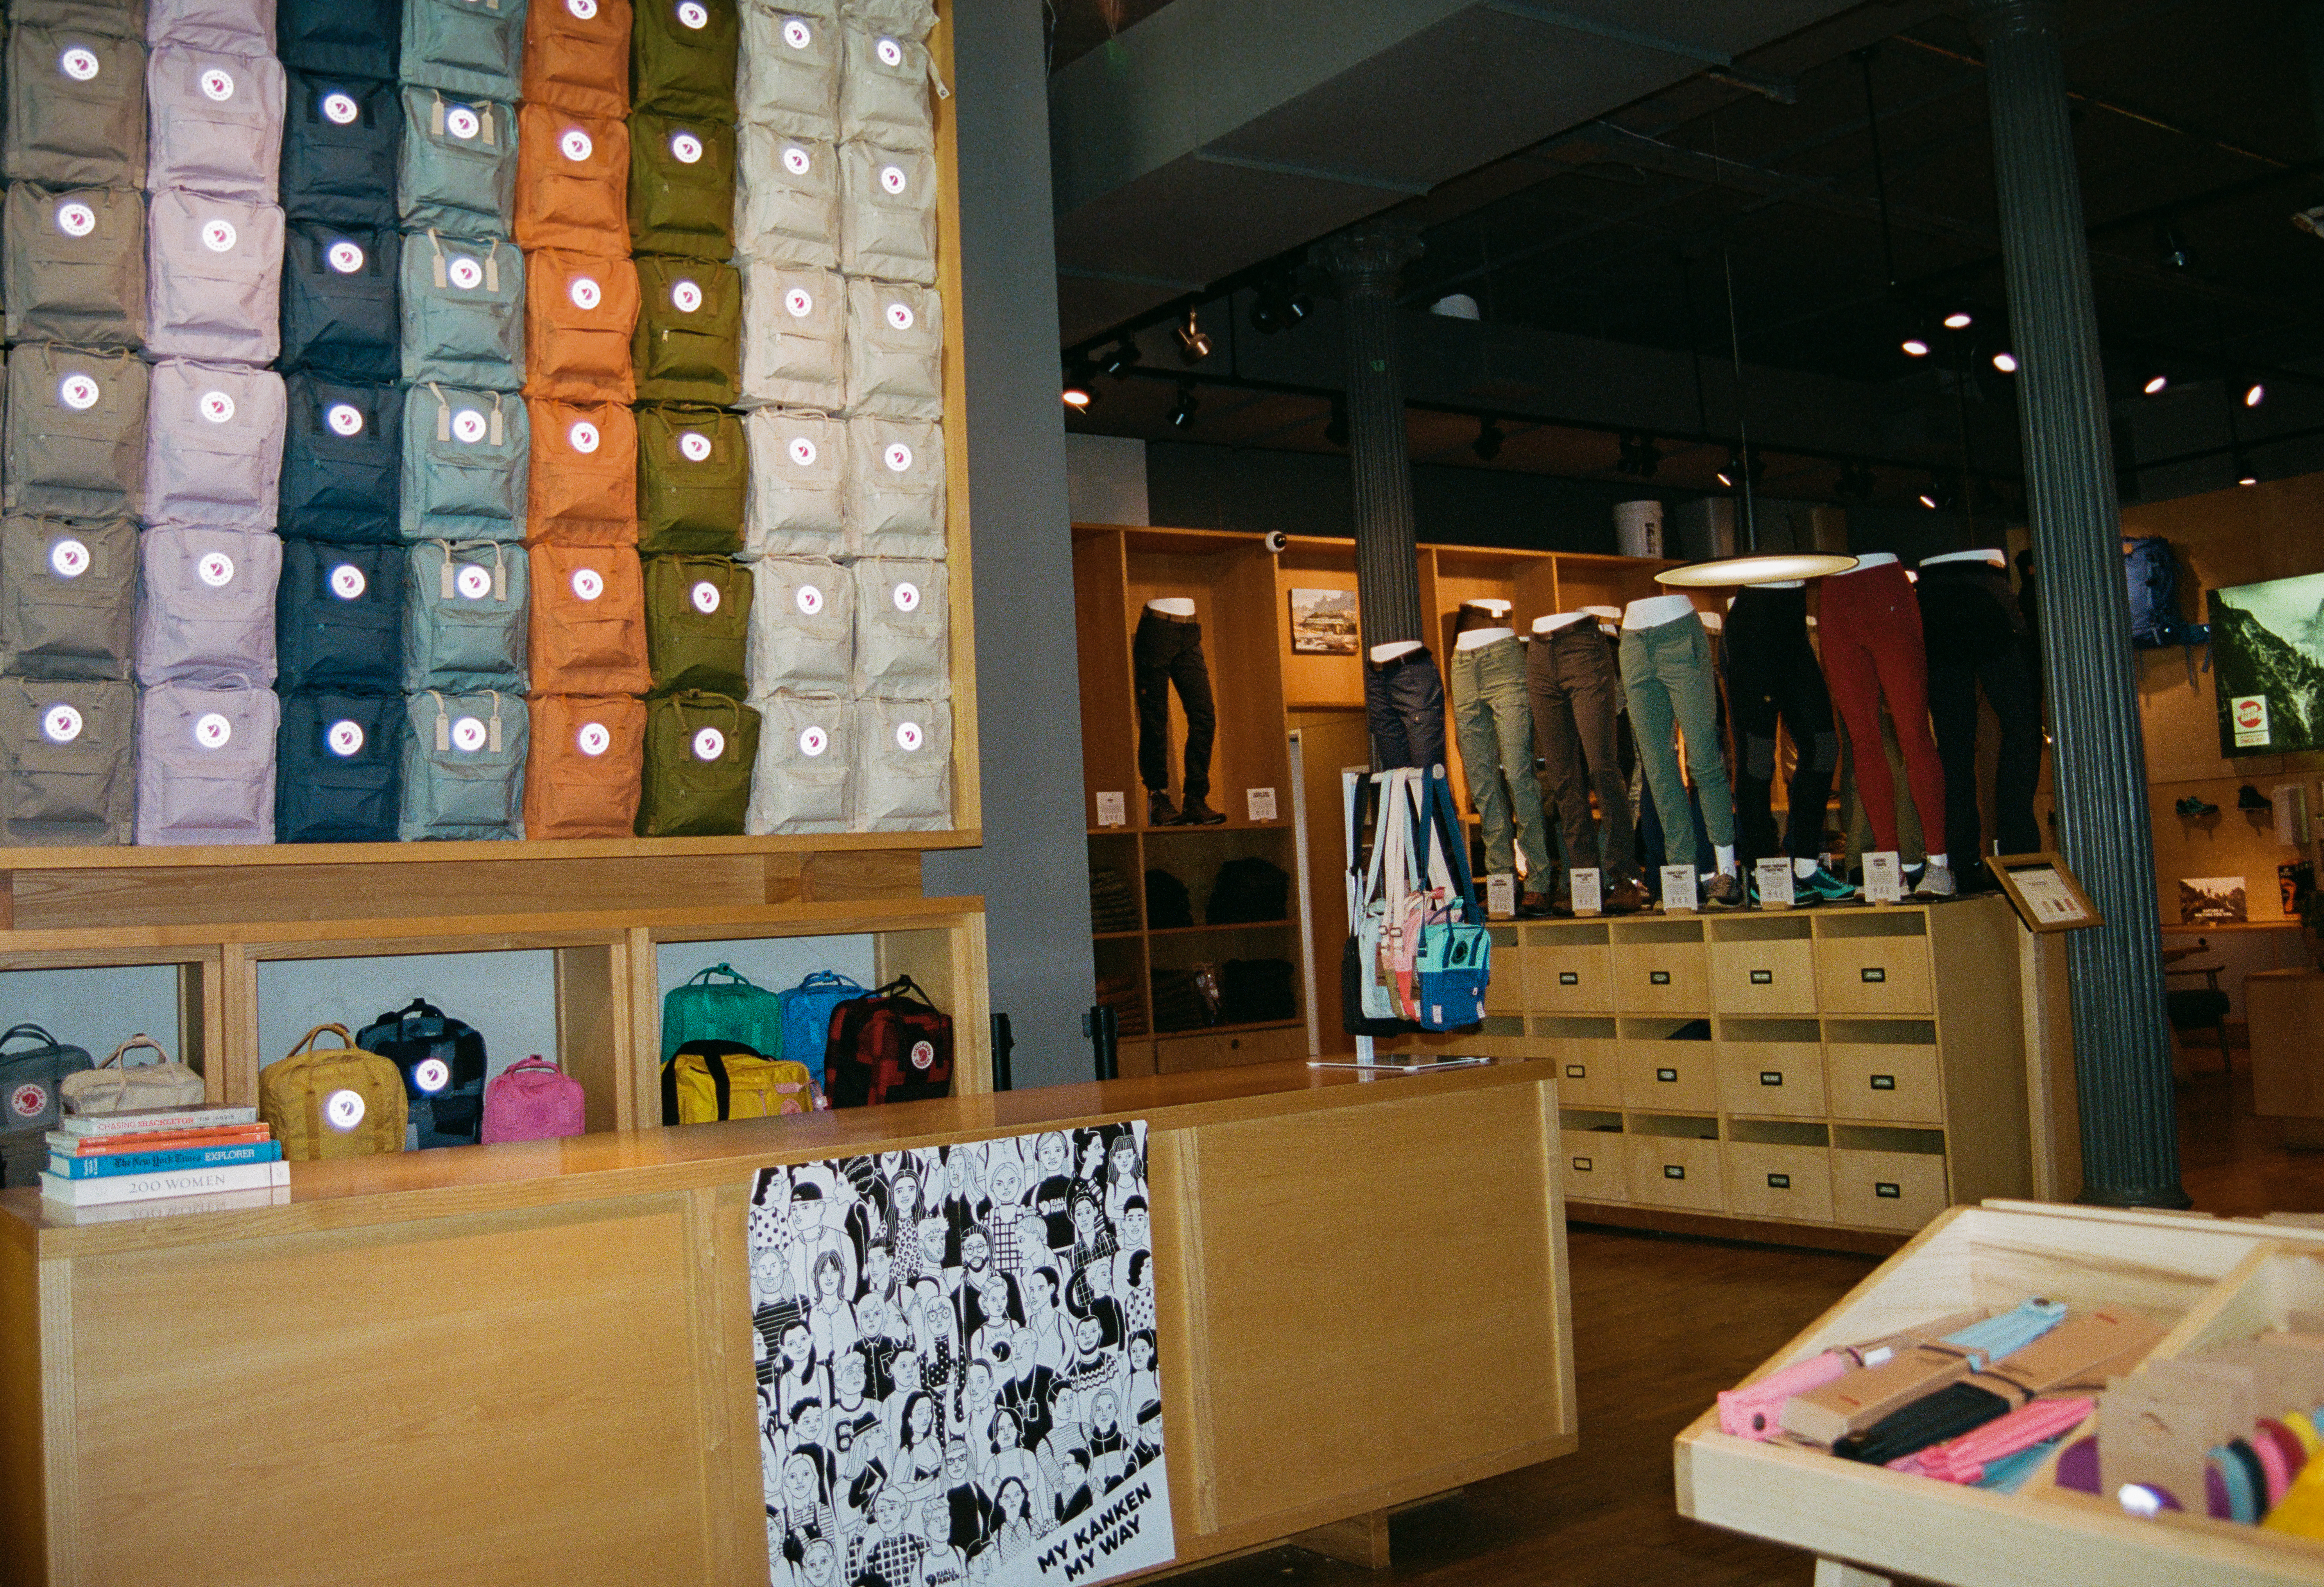 Fjallraven retailer in Ny, New York Store pic 4